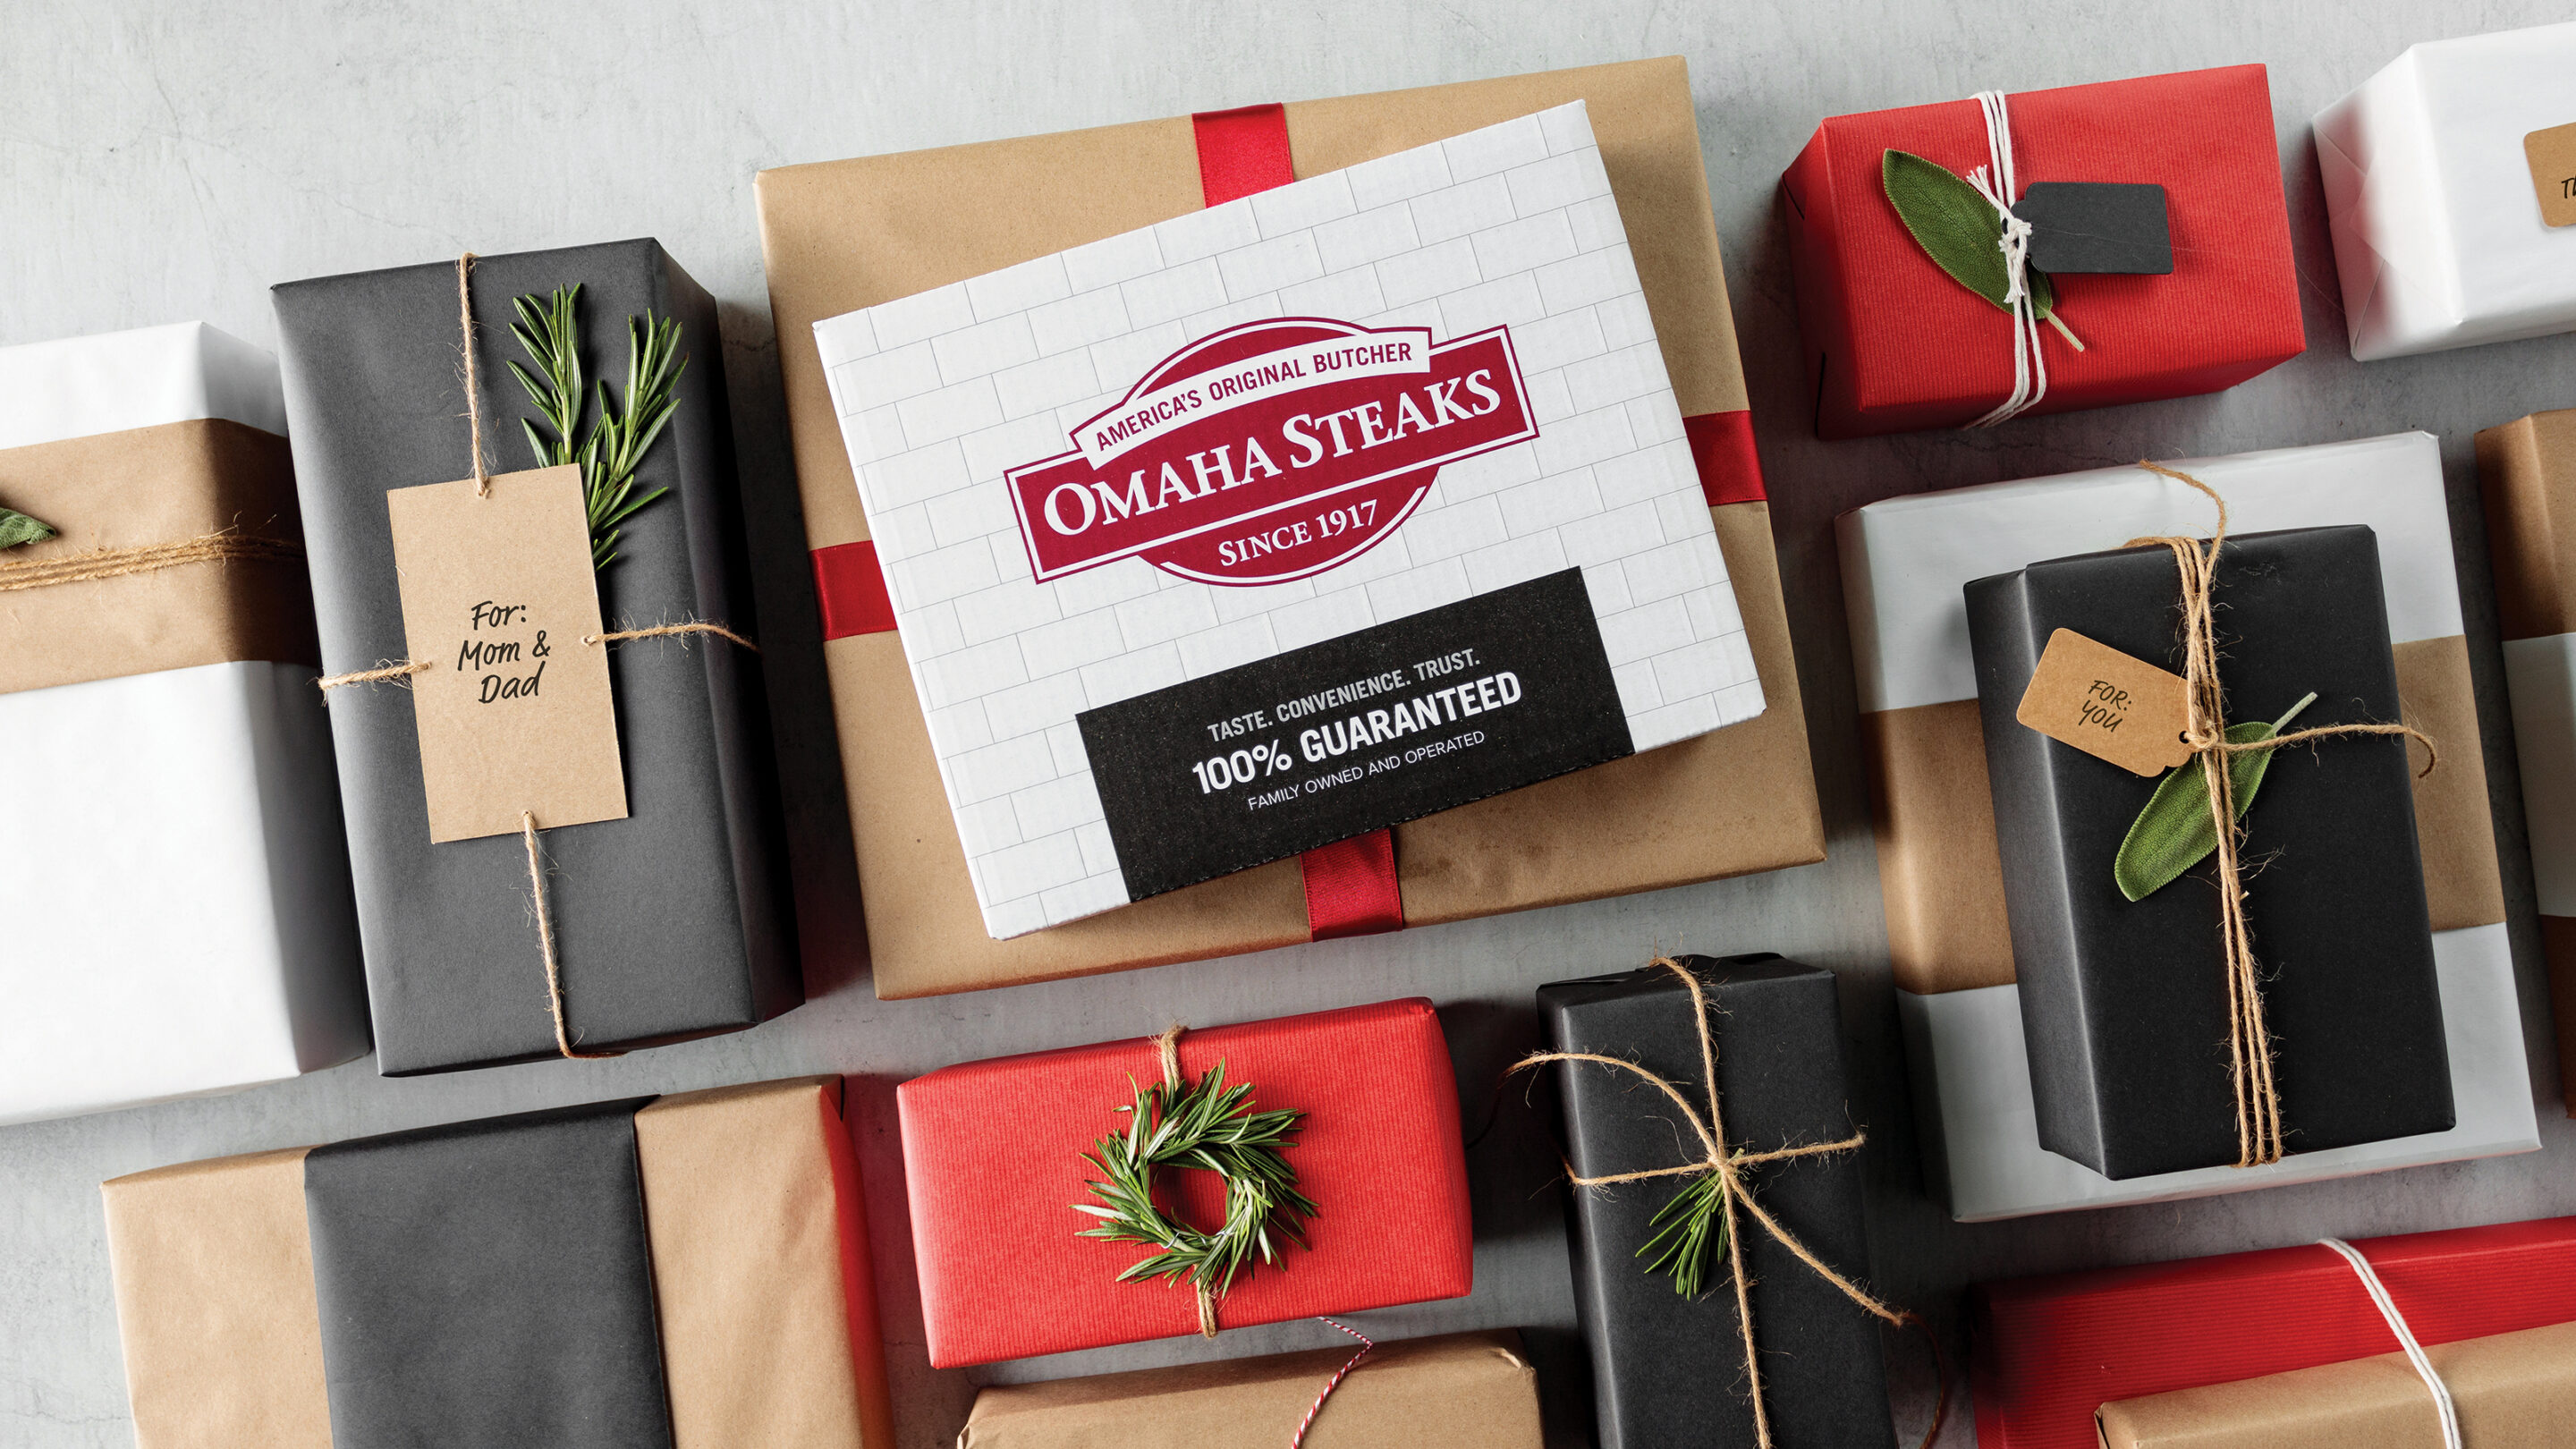 https://blog-content.omahasteaks.com/wp-content/uploads/2022/06/blogwp_how-to-find-the-best-deals-at-omaha-steaks-scaled-1.jpg